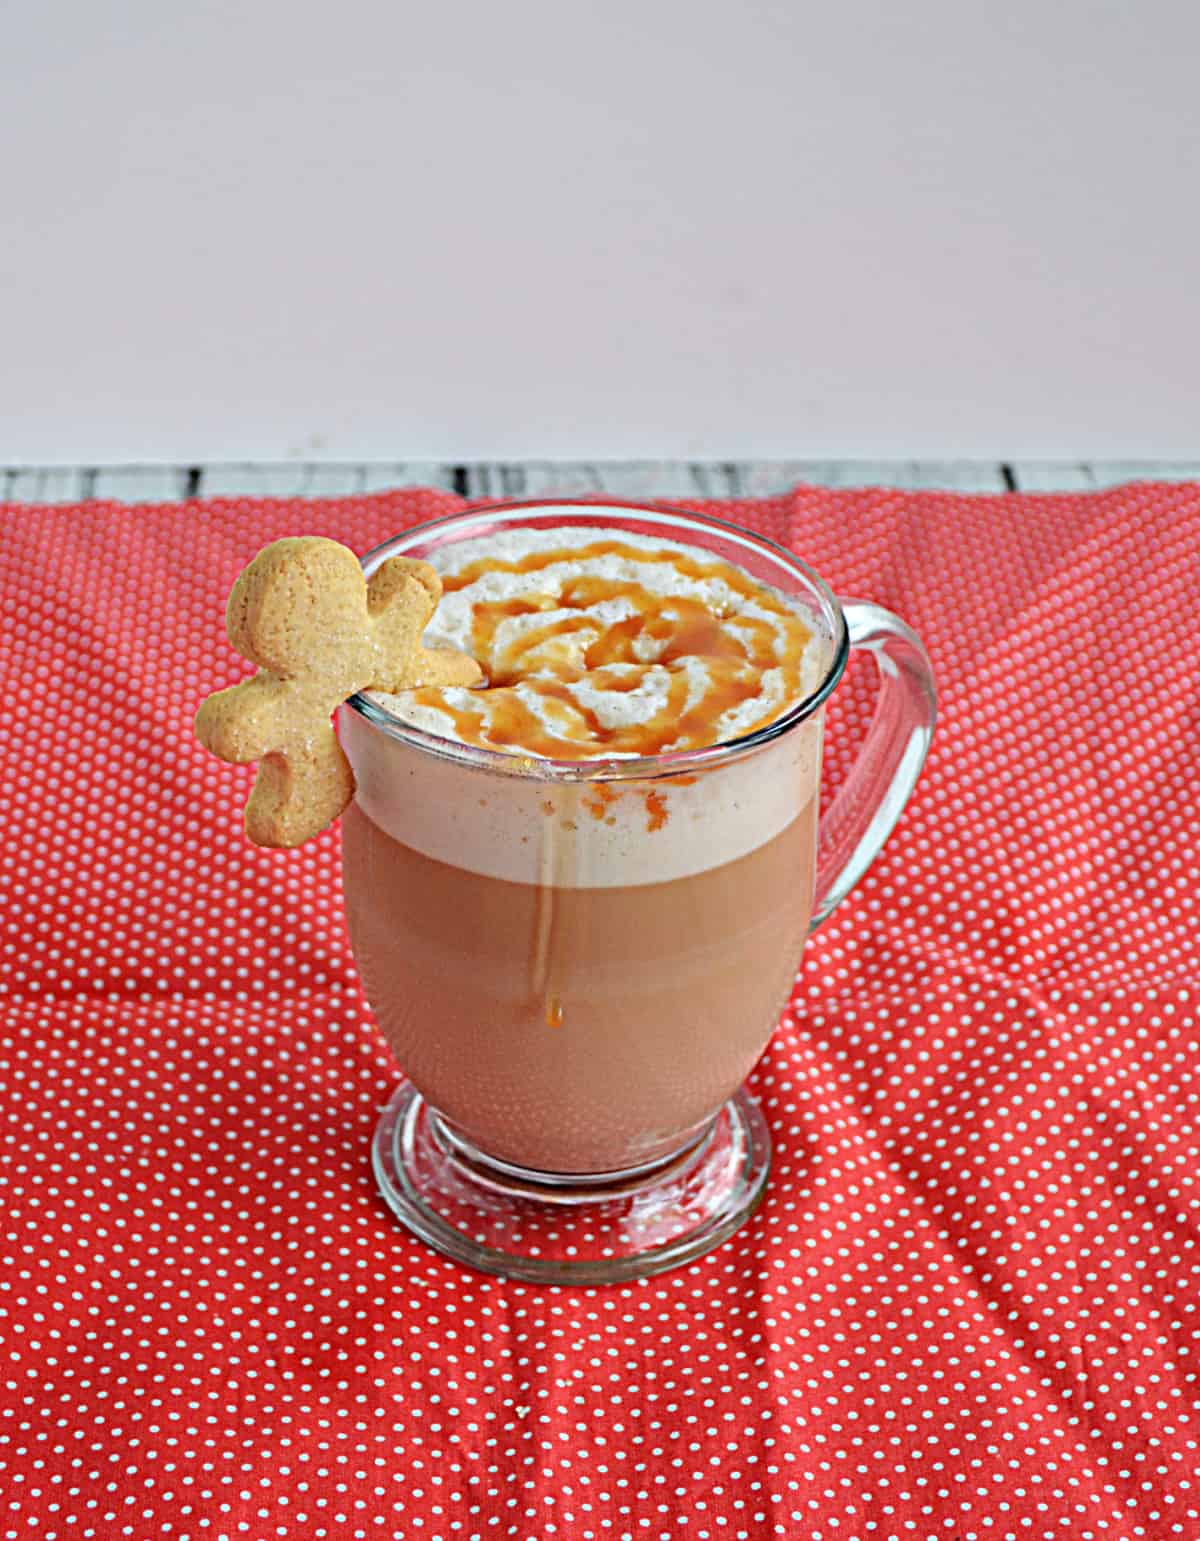 A mug of Gingerbread Latte with a caramel drizzle and a gingerbread man on the rim.